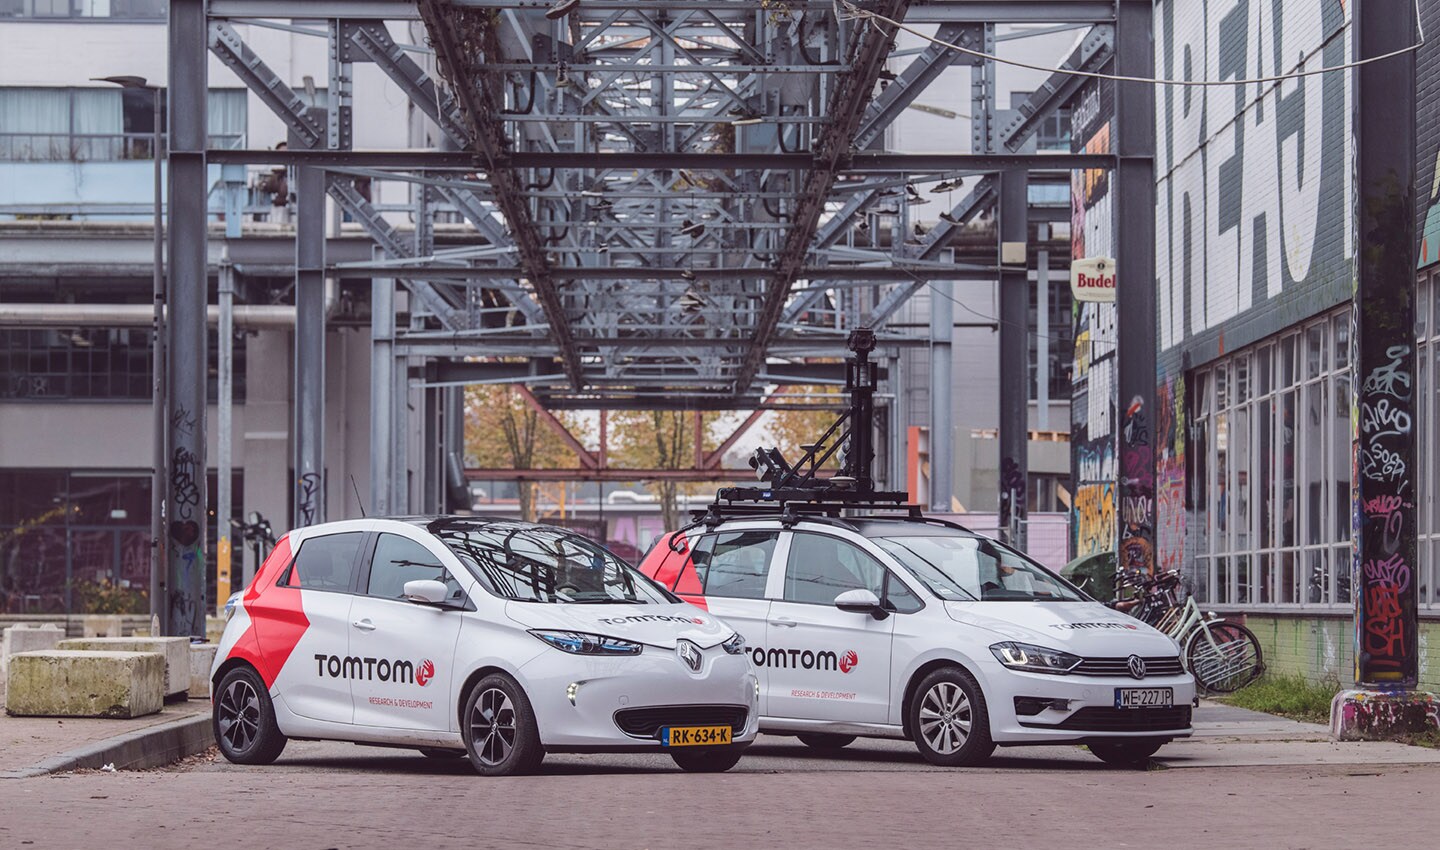 TomTom MoMa cars recently had their 20th anniversary. They’ve been mapping the world’s roads longer than anyone else.